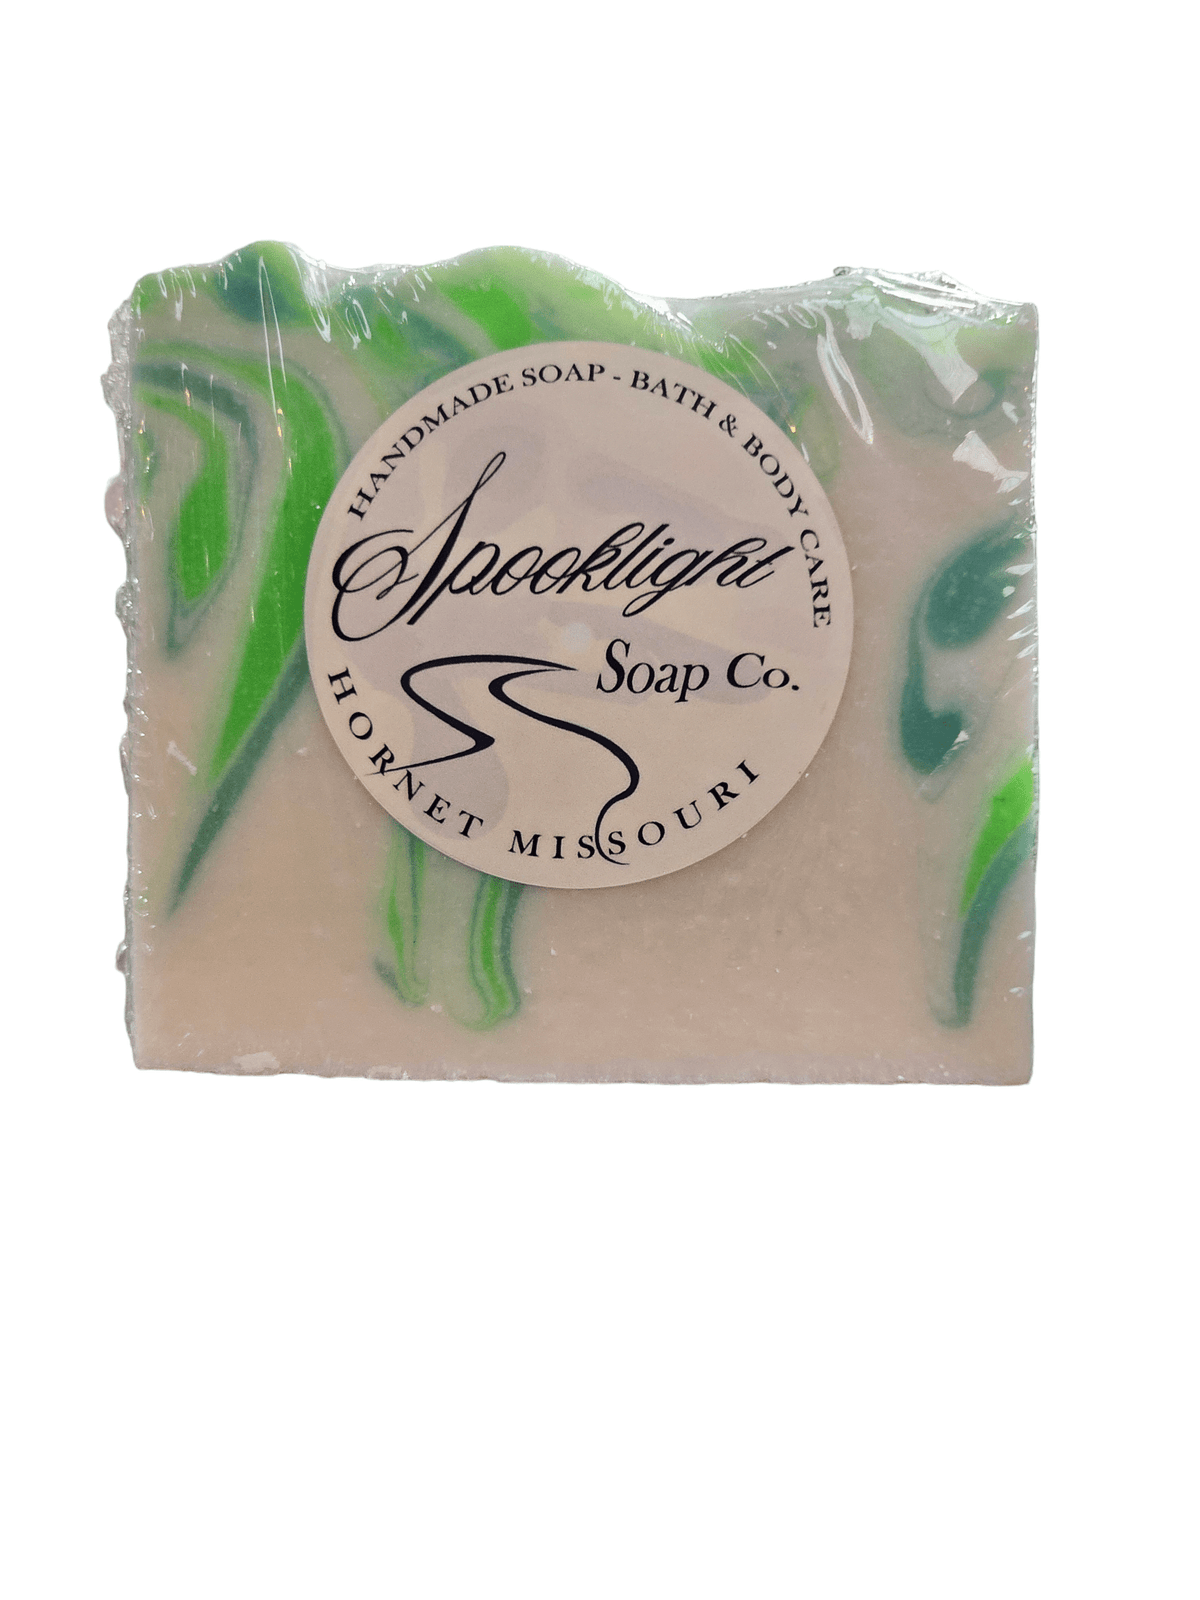 Orchard Ghost Whispers Soap | Citrus & Floral Blend | Moisturizing Olive Oil Bar by Spooklight Soap Co.